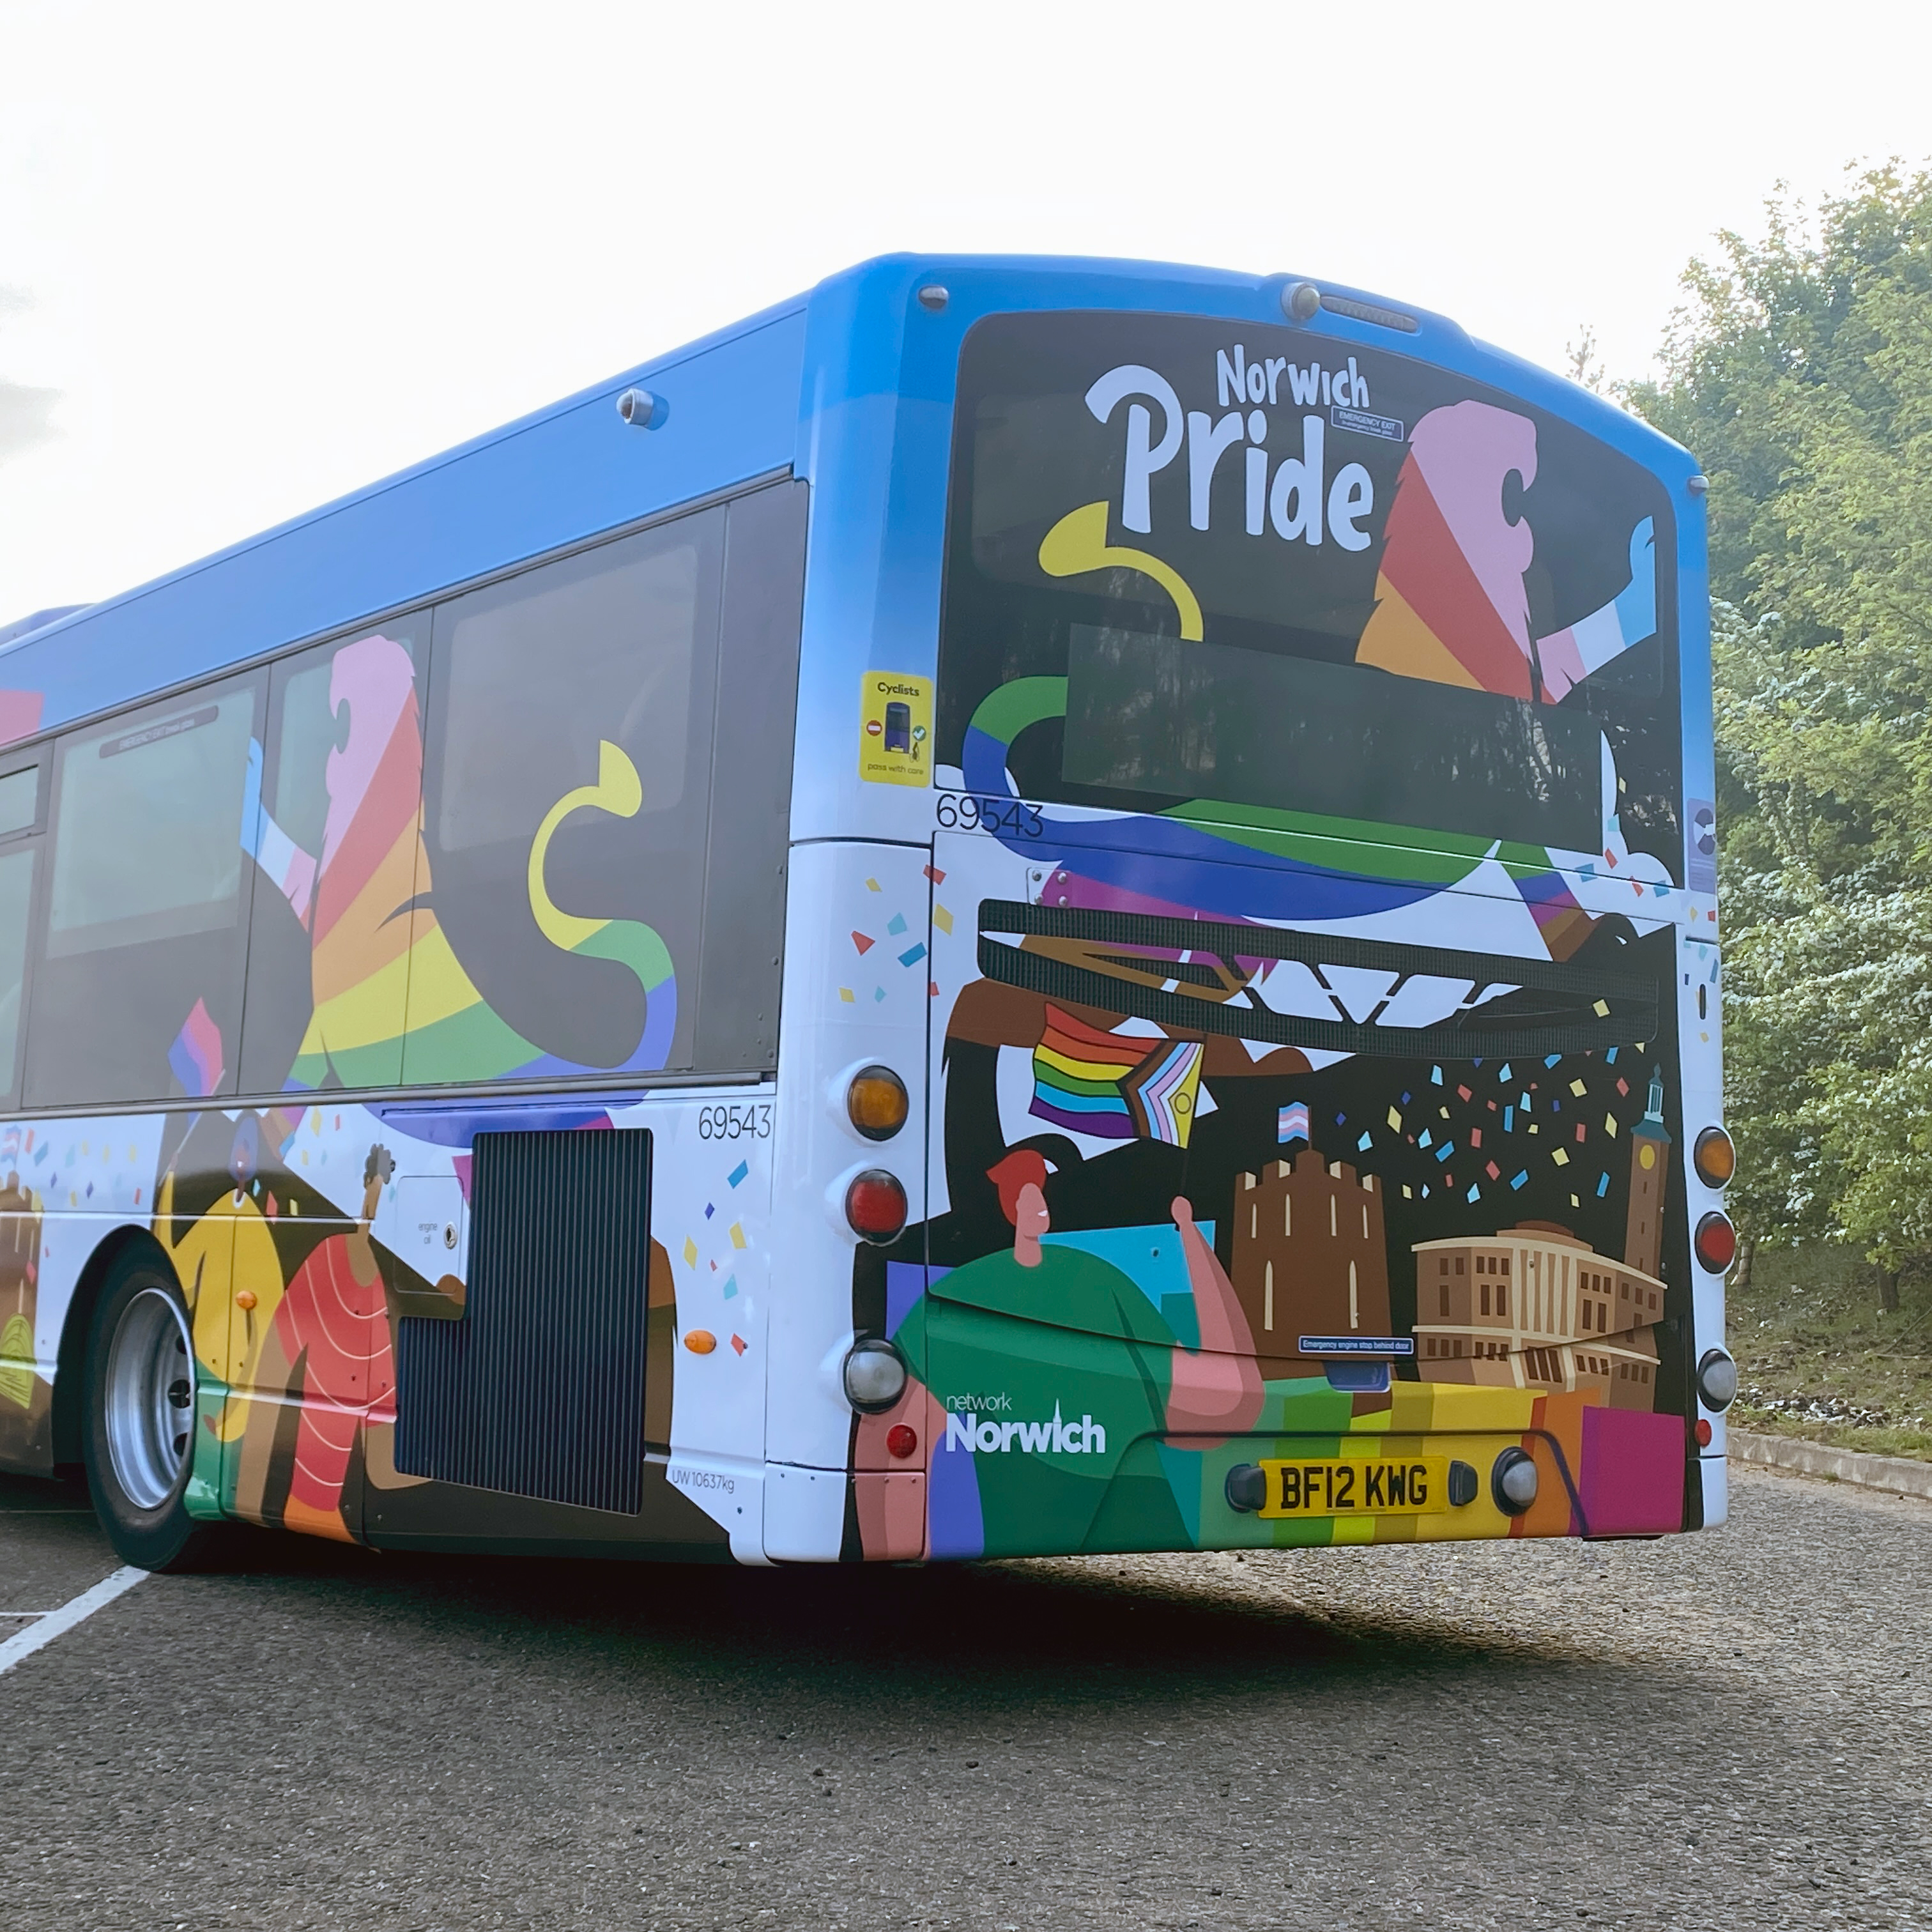 The rear of the bus incorporating Norwich Pride's logo.